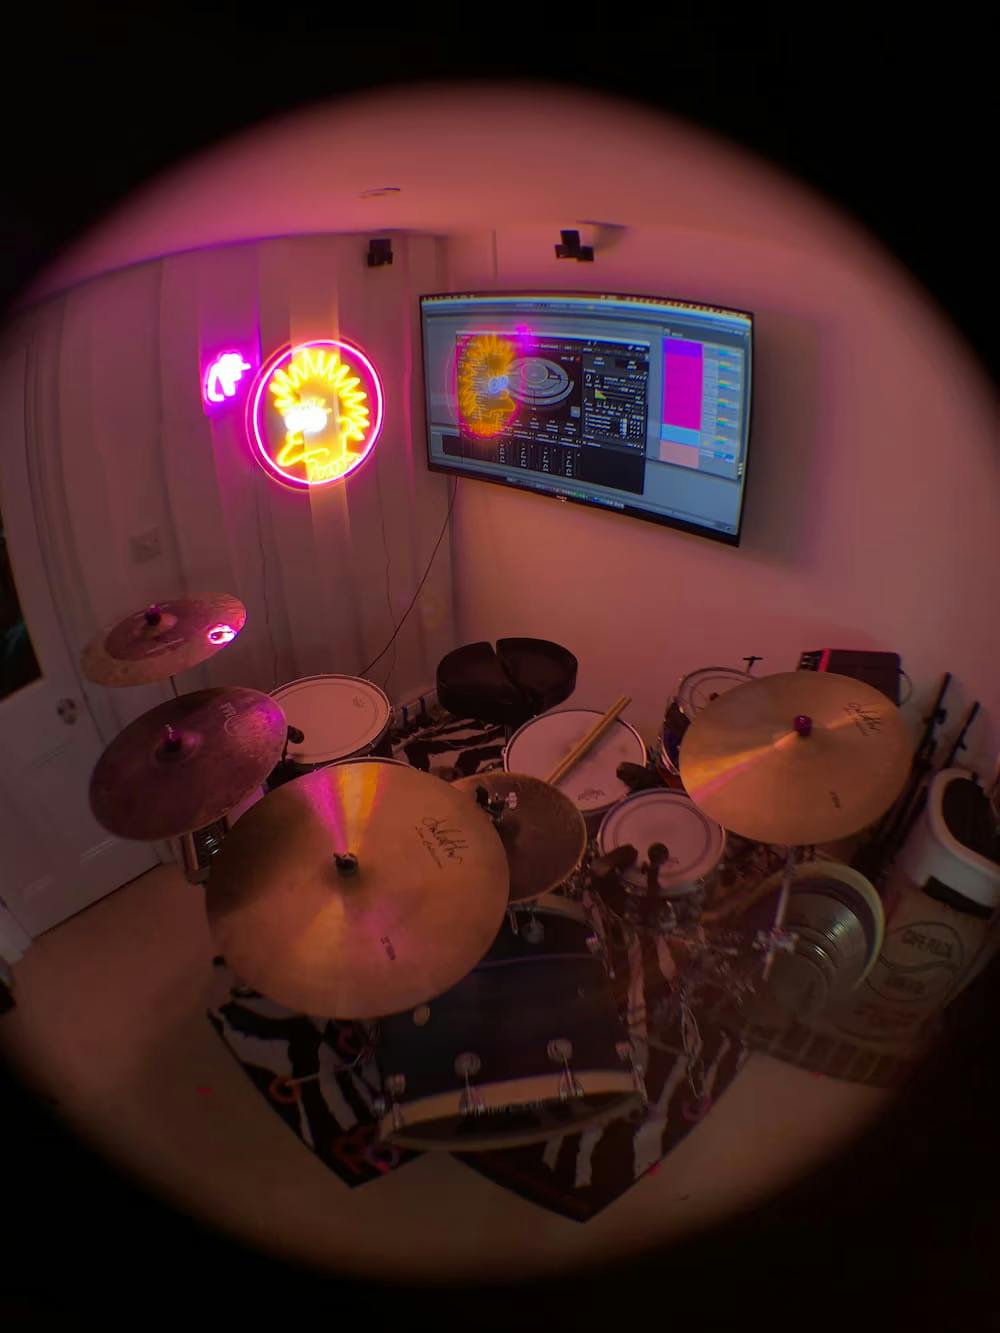 Meg uses both mesh and acoustic heads in her setup.